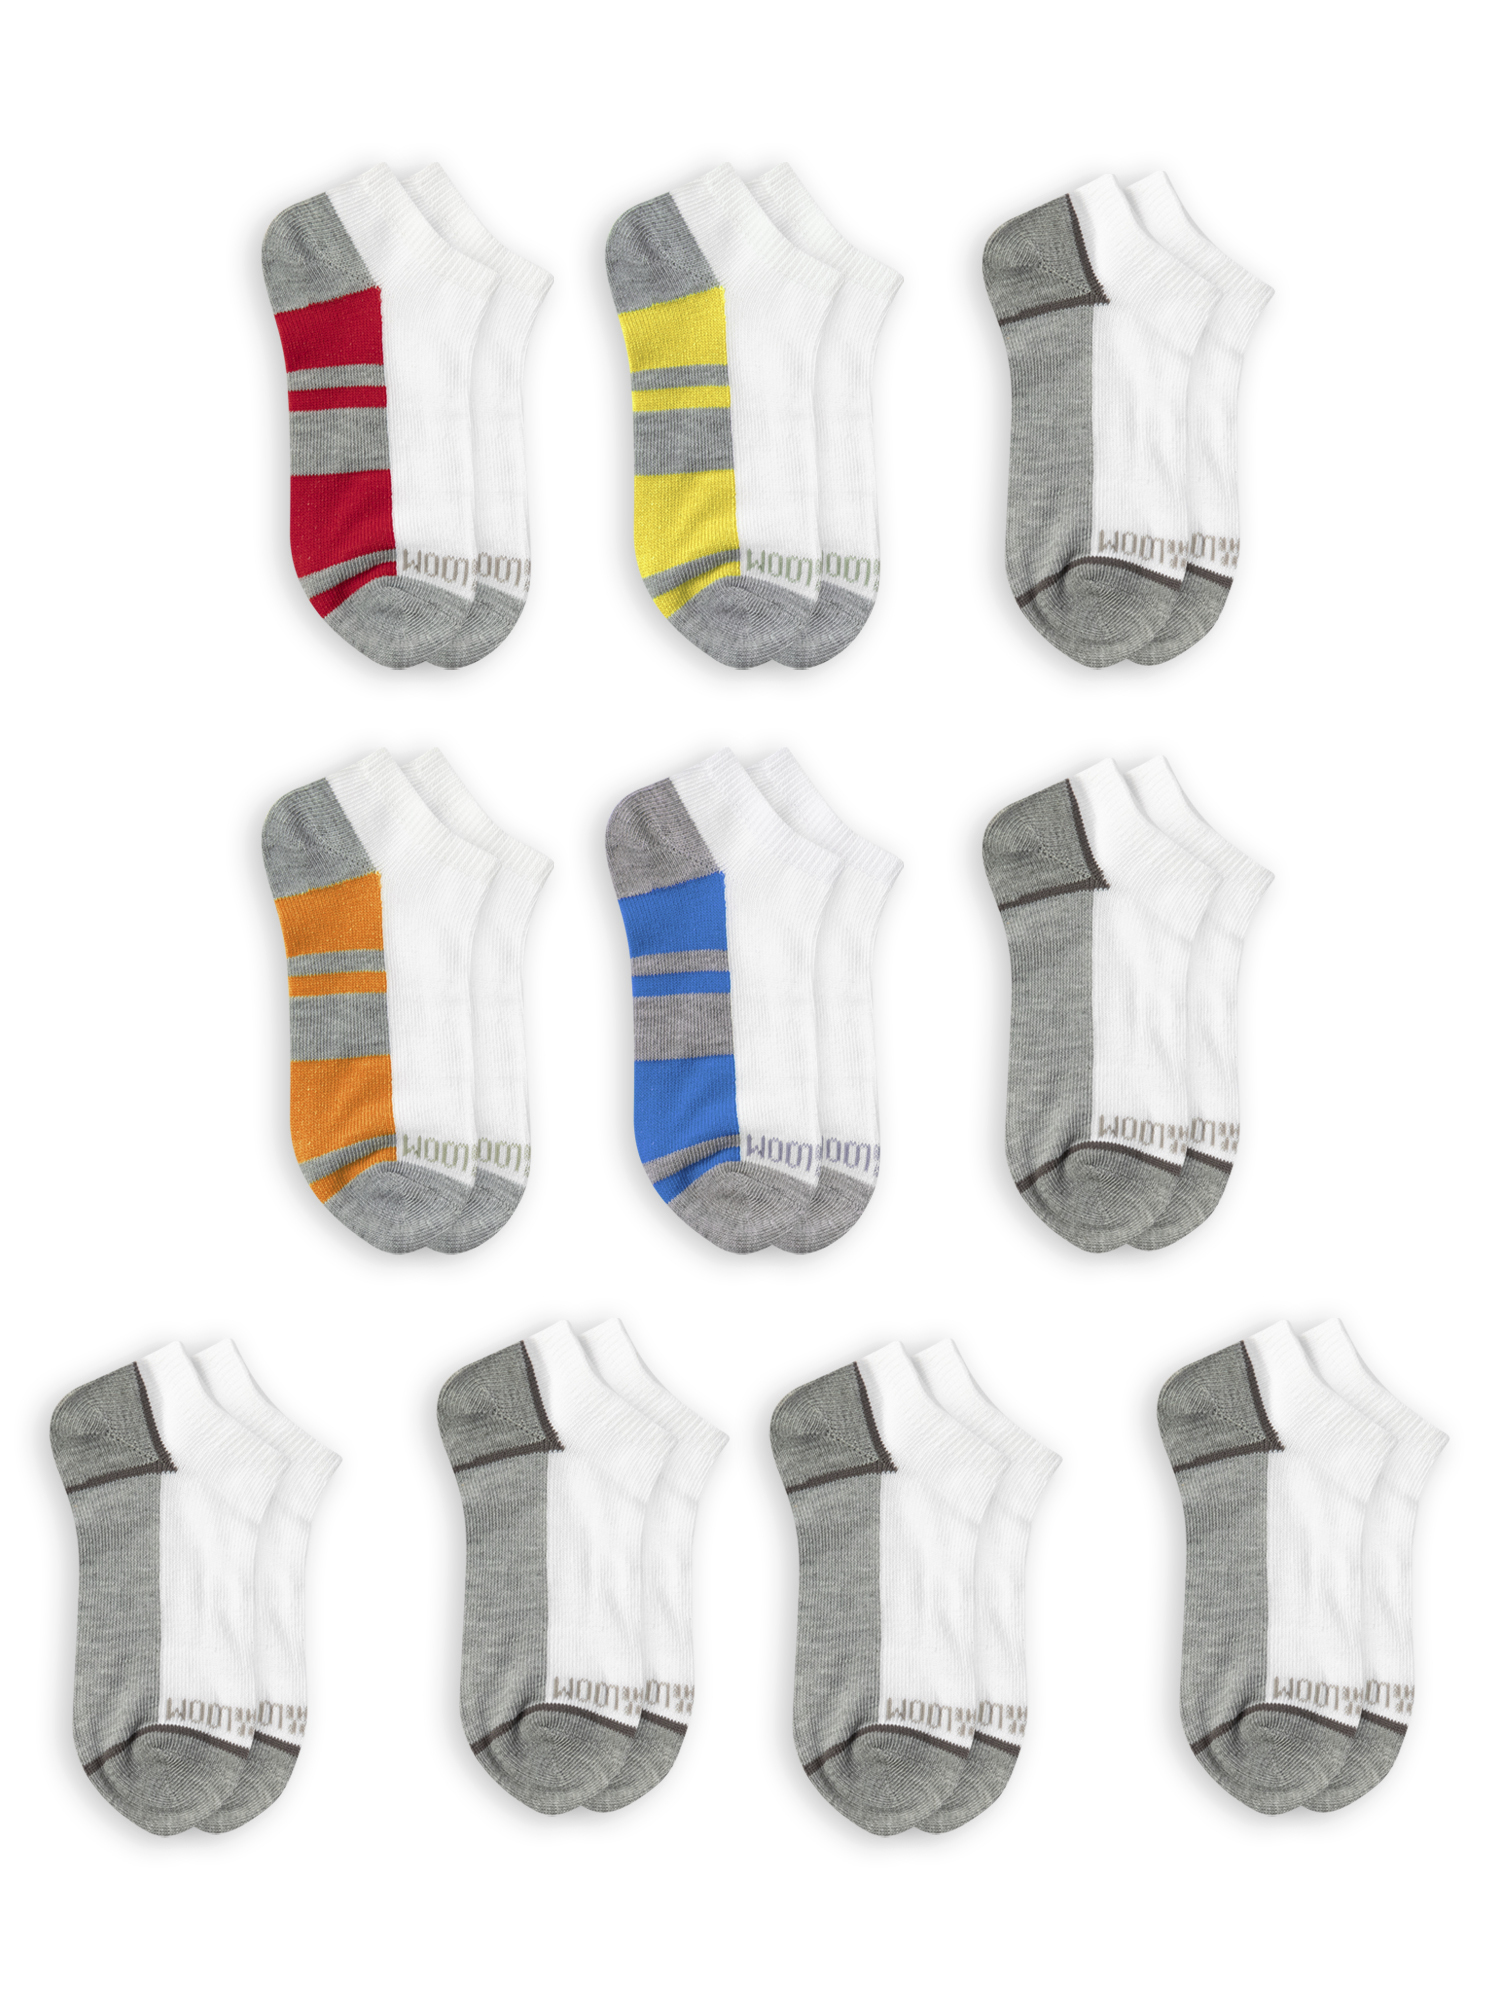 Fruit of the Loom No-Show Durable Solid Striped Socks (Big Boys or Little Boys) 10 Pack - image 1 of 5